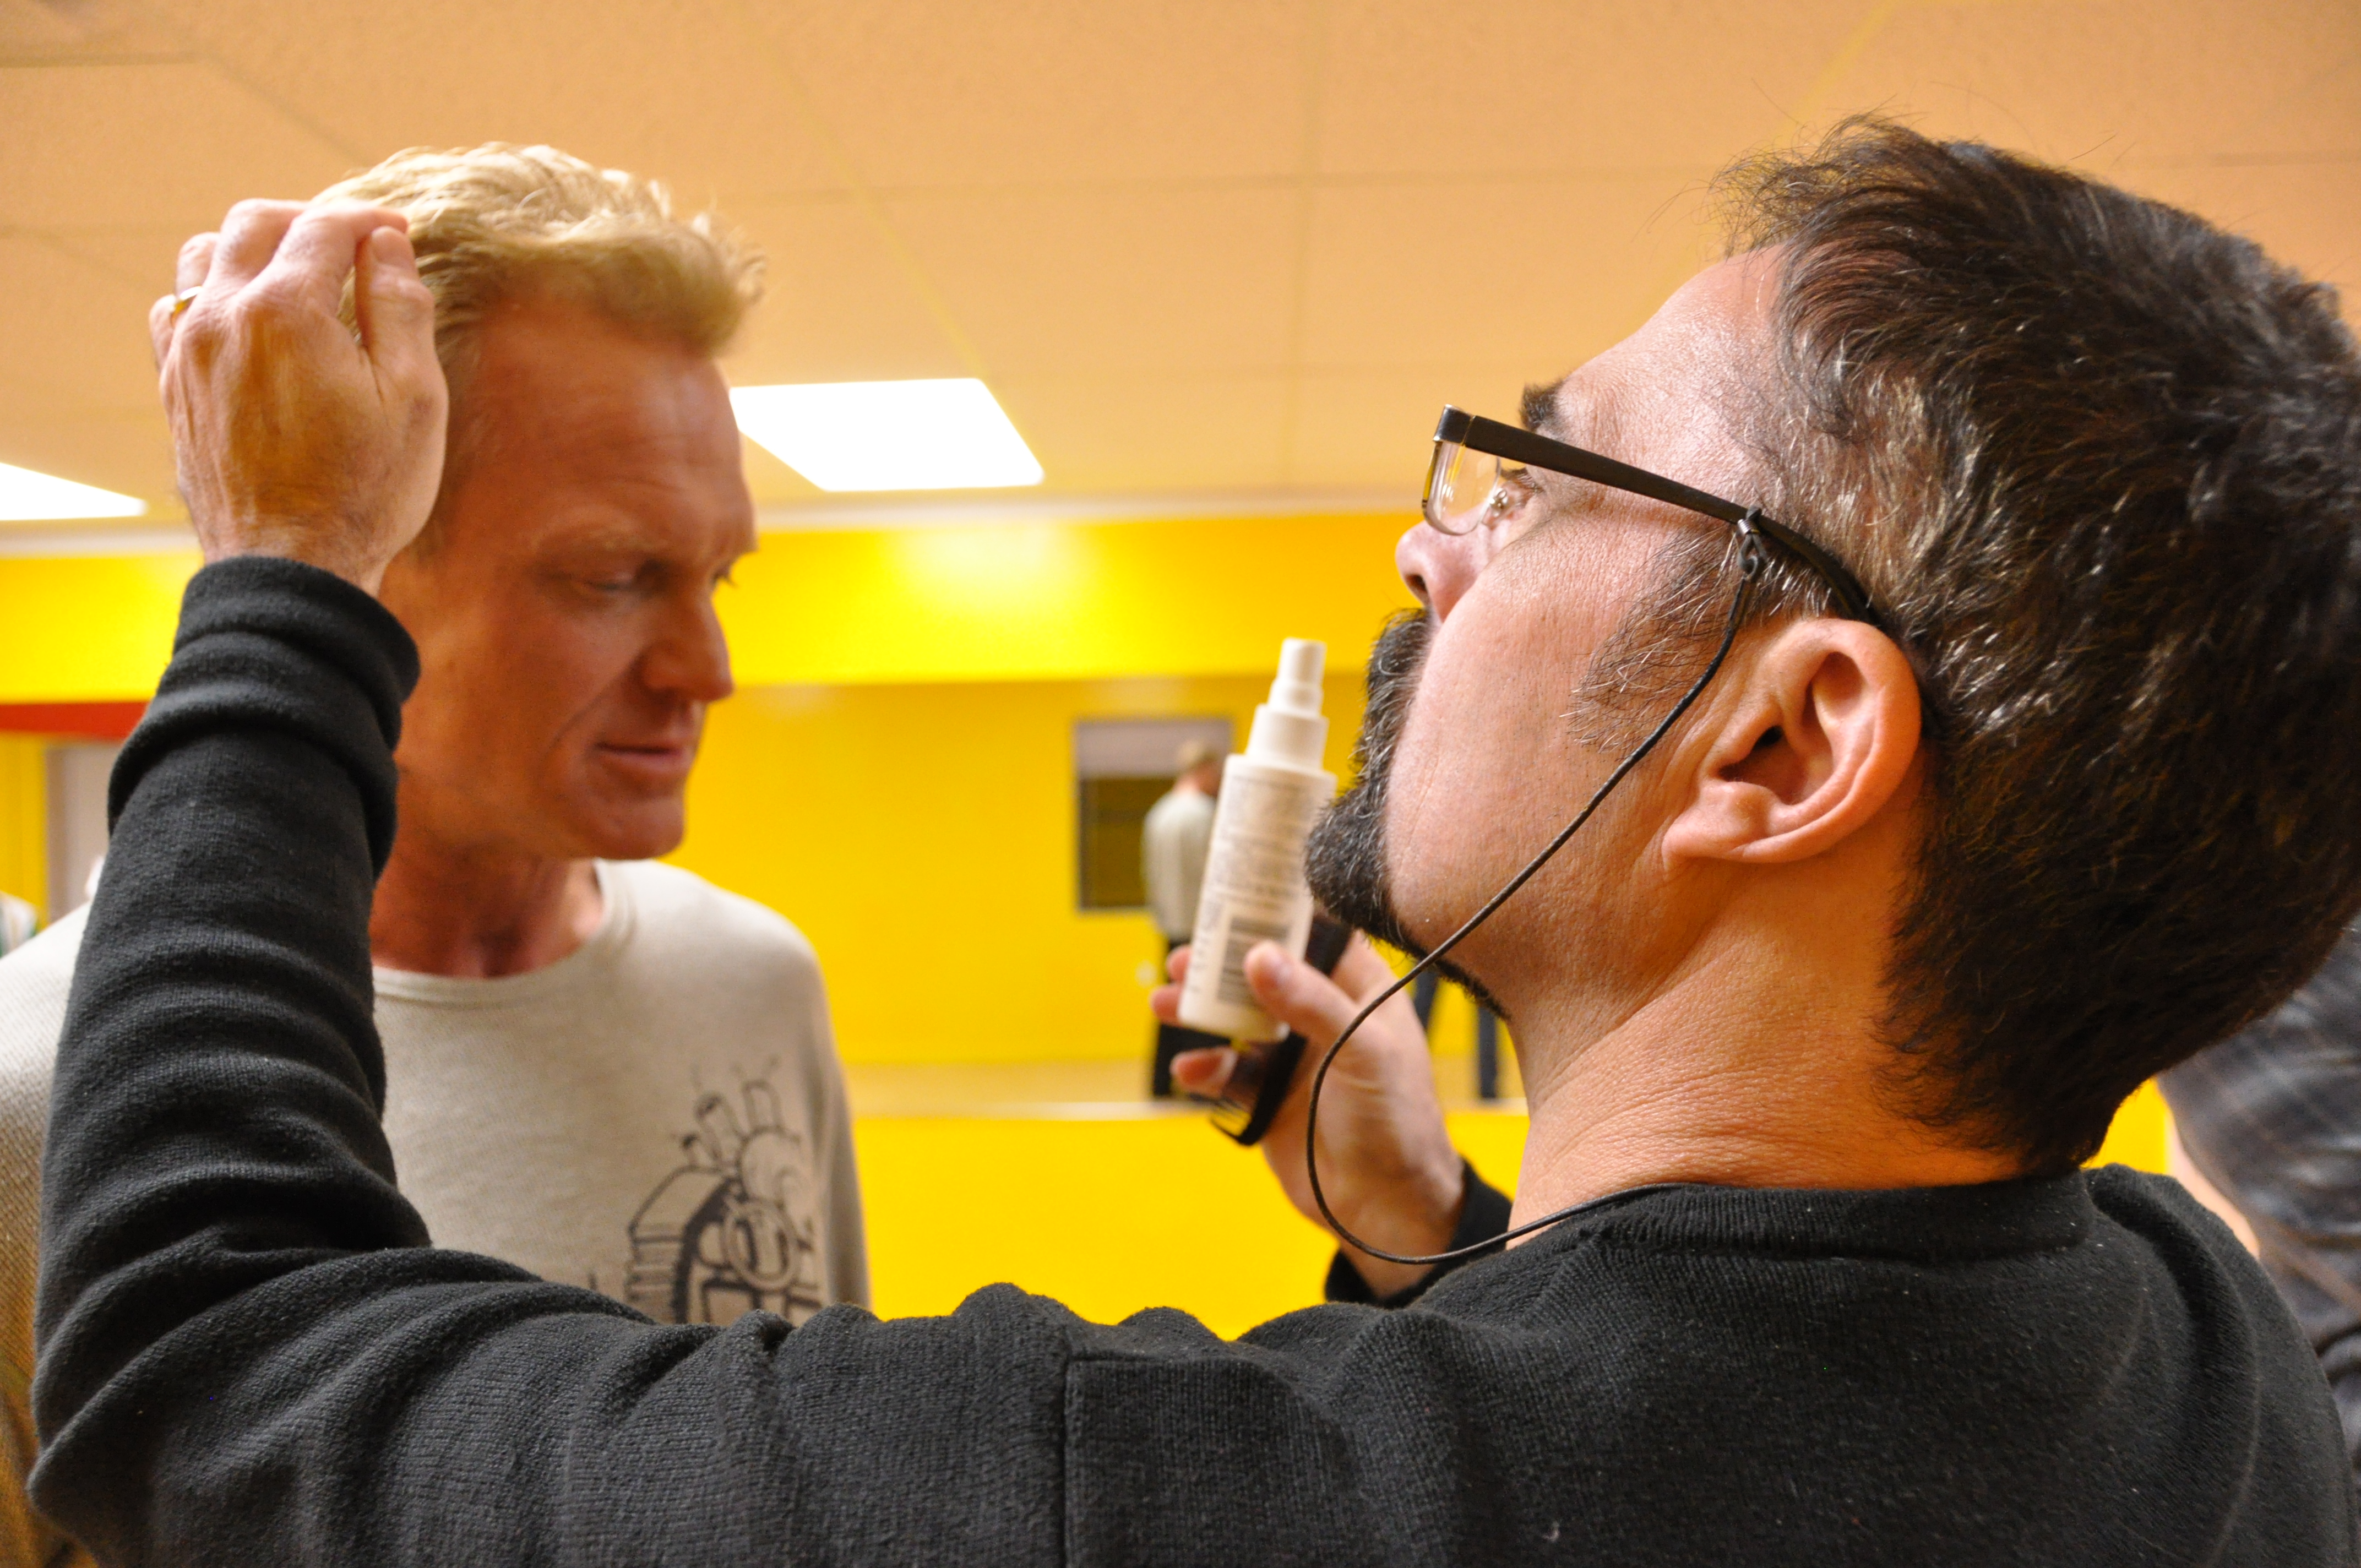 Makeup Artist,Joe Rossi working on Bobby at the Filming of VIG Lifestyle!